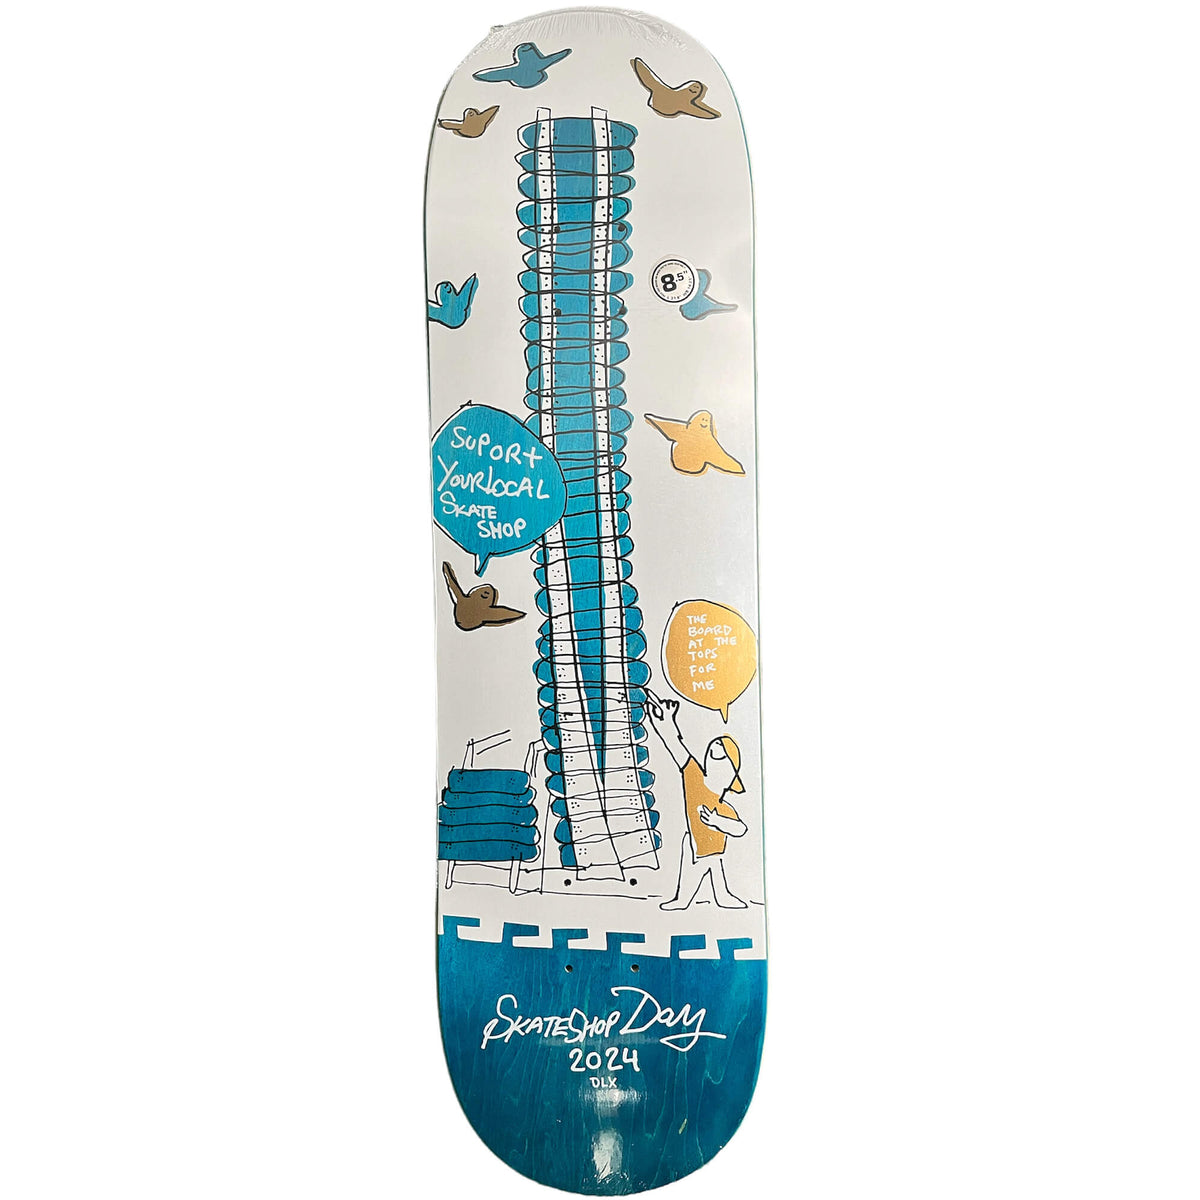 Deluxe x Skate Shop Day 2024 Limited Edition Skateboard Deck 8.5" Blue